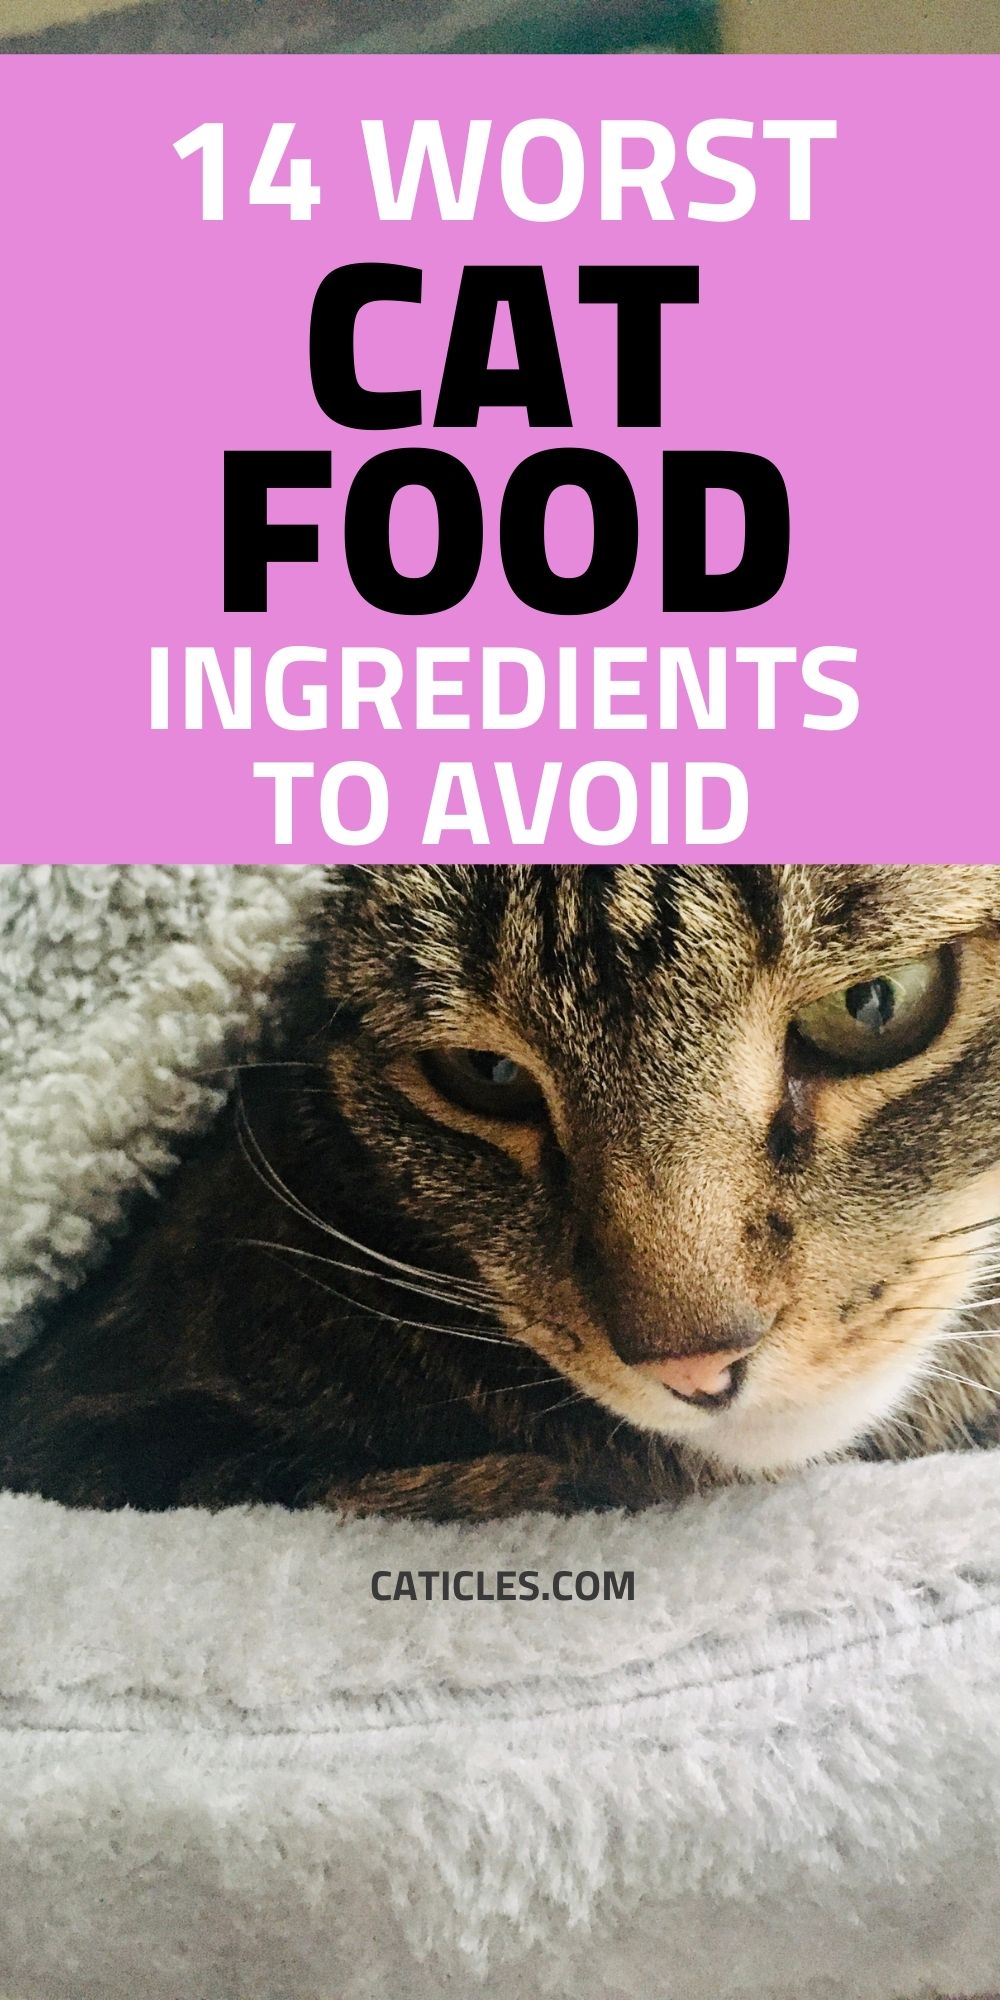 Ingredients in Cat Food (What to AVOID and Why)